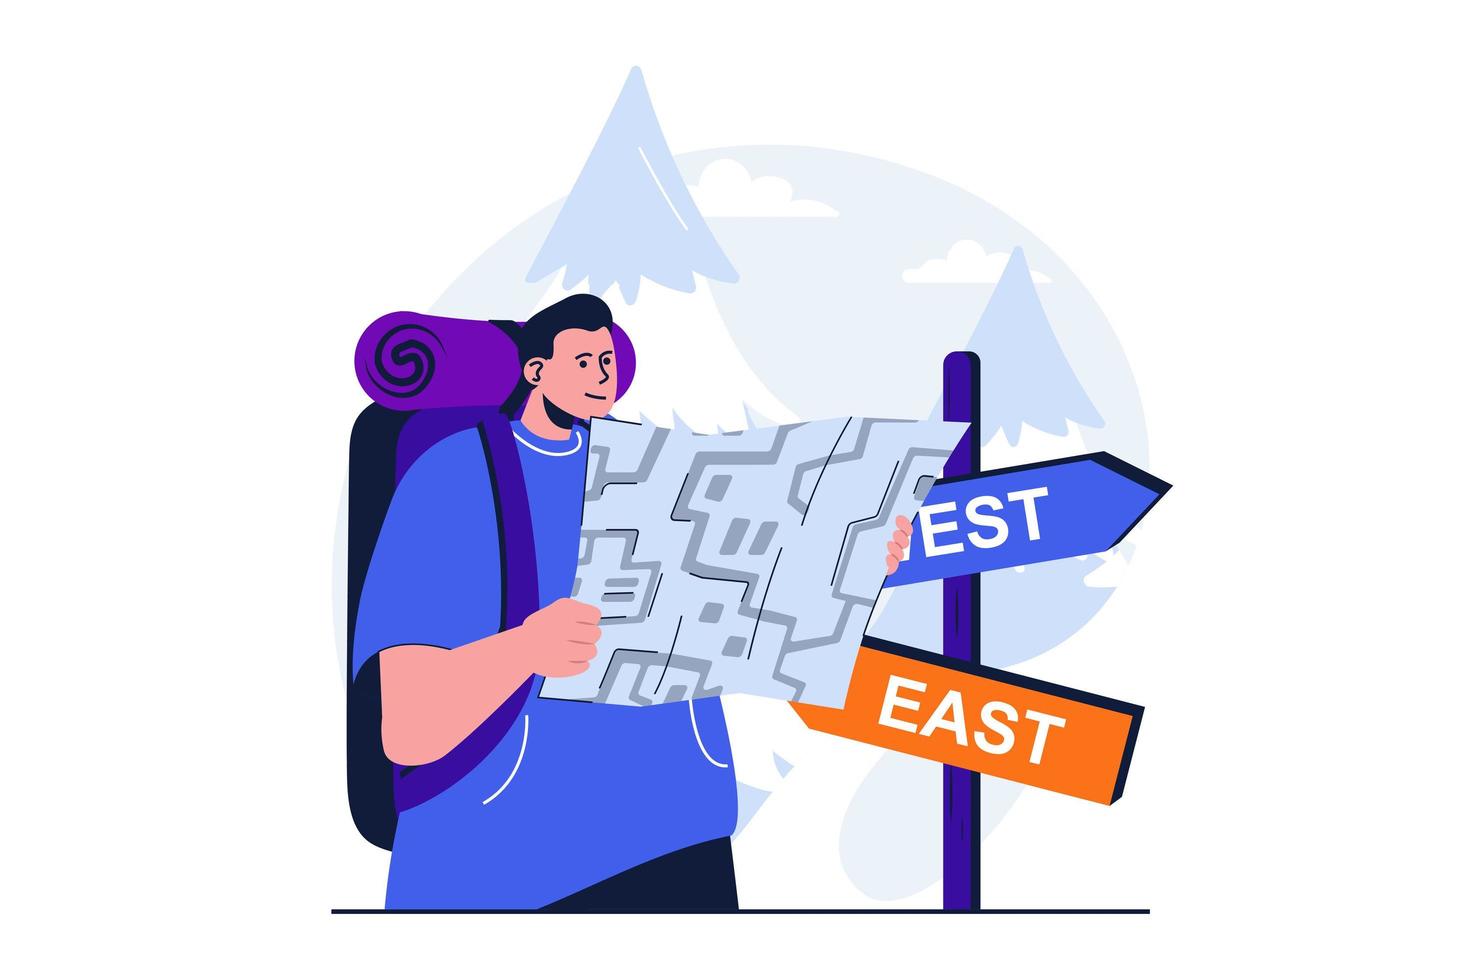 Traveling modern flat concept for web banner design. Man tourist with backpack looking at map and chooses direction of hiking route at sign post. Vector illustration with isolated people scene